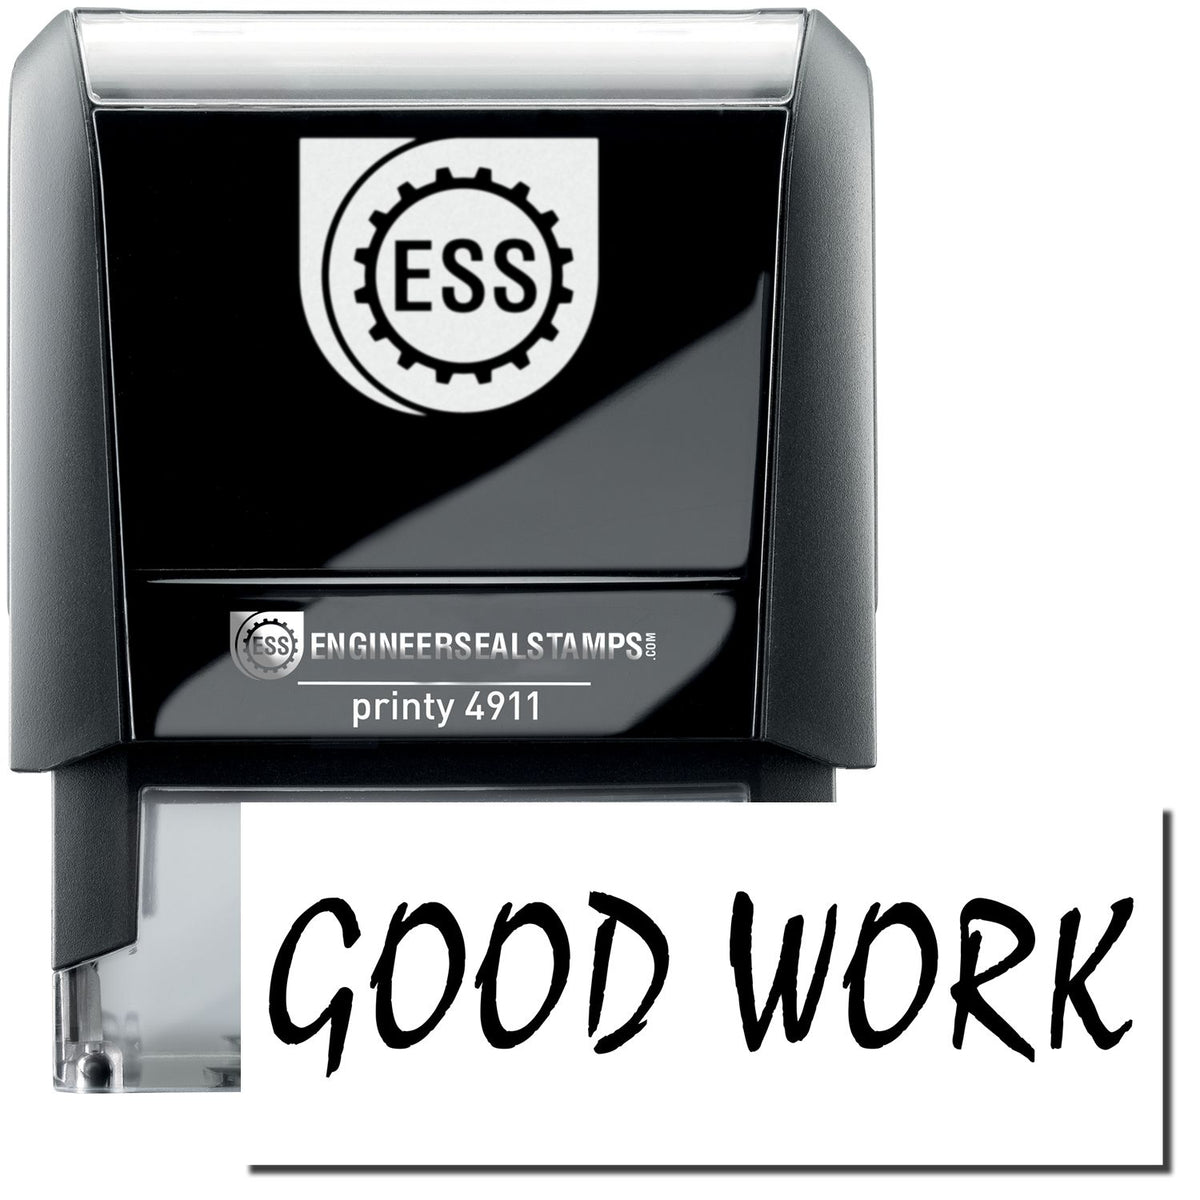 A self-inking stamp with a stamped image showing how the text &quot;GOOD WORK&quot; is displayed after stamping.